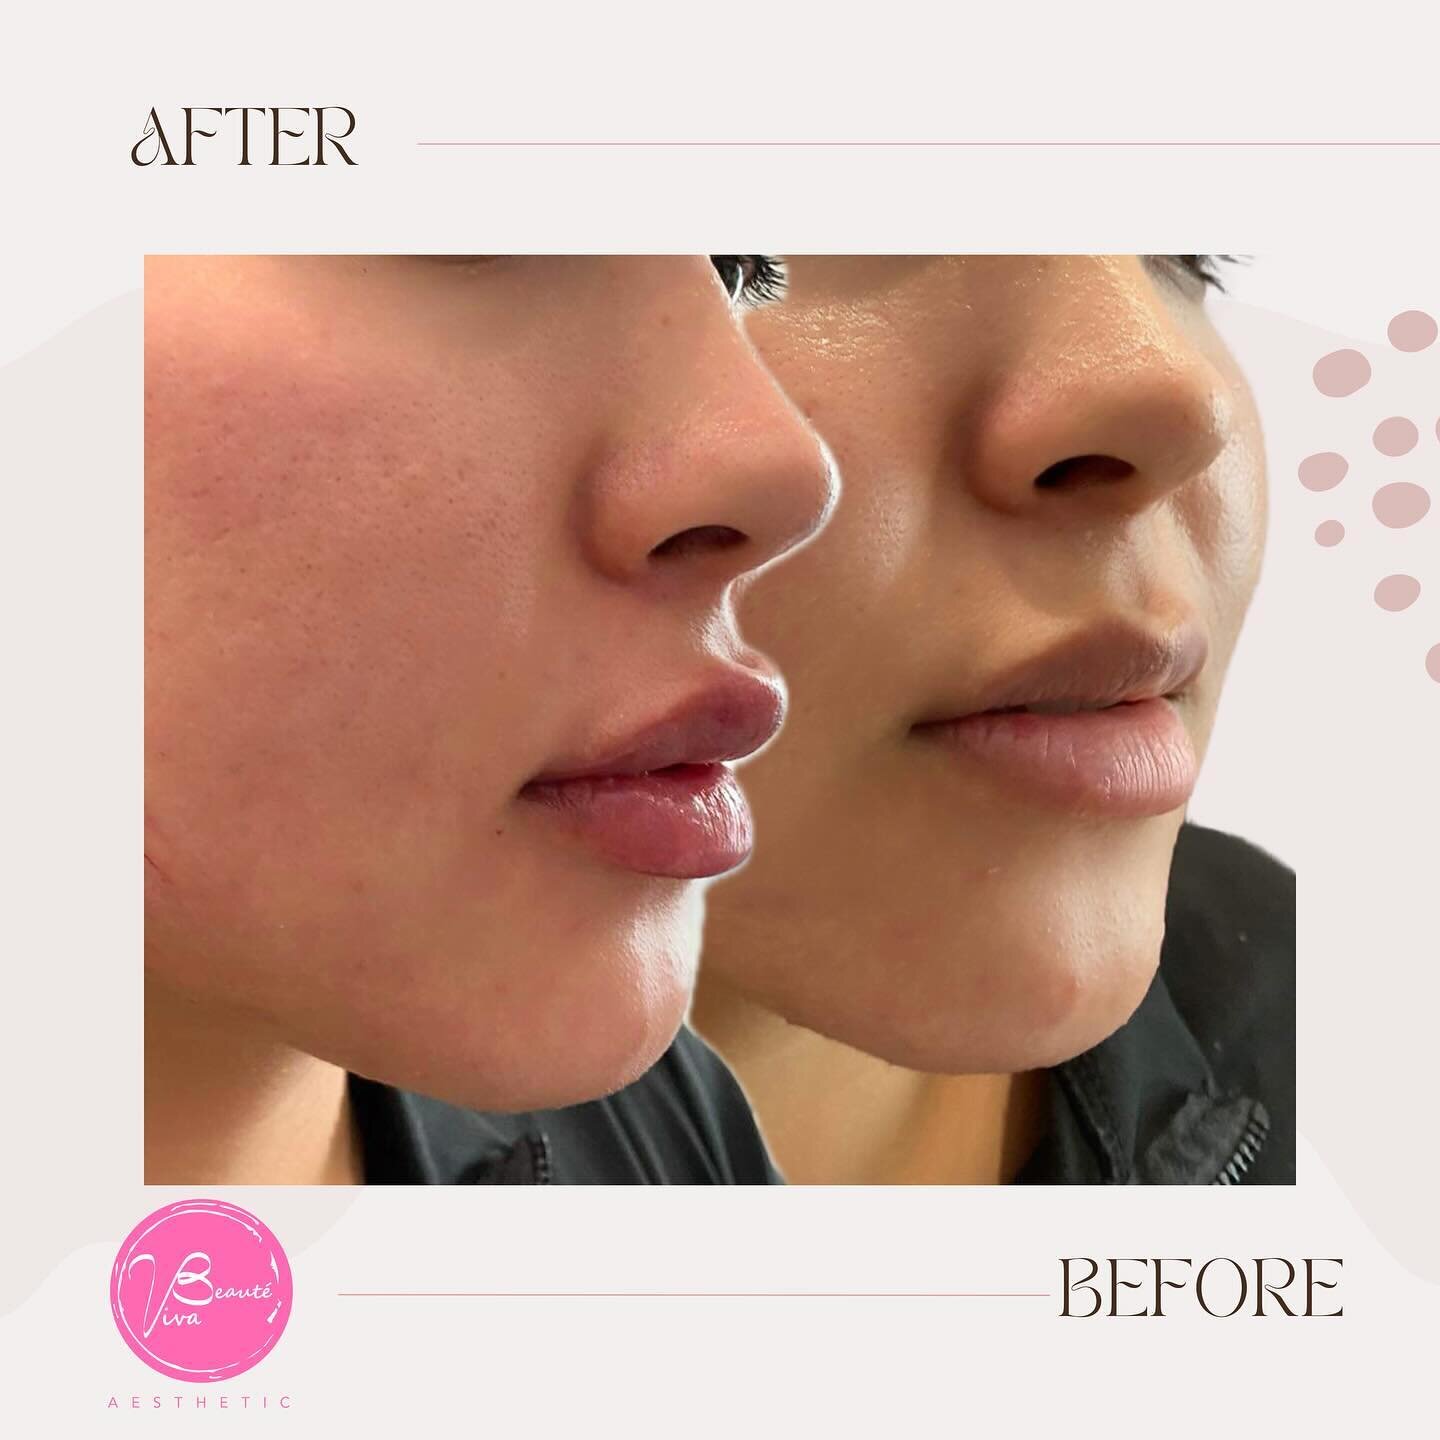 👄 Addressing the client's desire for fuller lips and correction of the downturned corners of the mouth (curling oral commissure). 

💫 Treatment: Medium Lips Filler
💉 Quantity: 1ml x dermal filler
⏰ Duration: 1 hr (includes numbing cream)
🙅🏼&zwj;